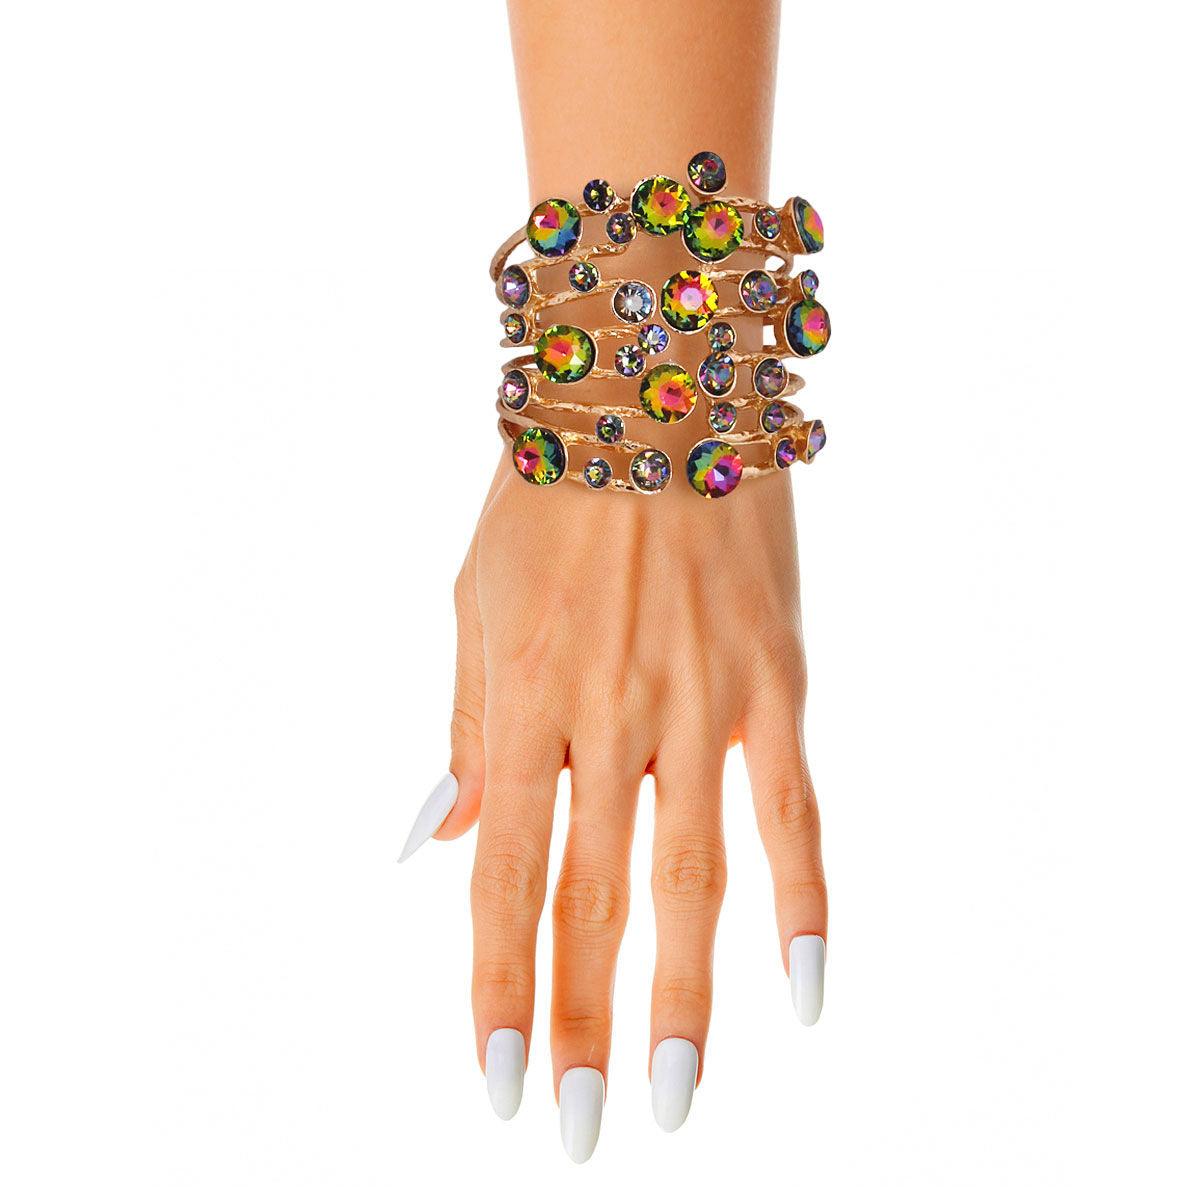 Glam Up Your Wrist: Textured Bracelet with Colorful Rhinestones